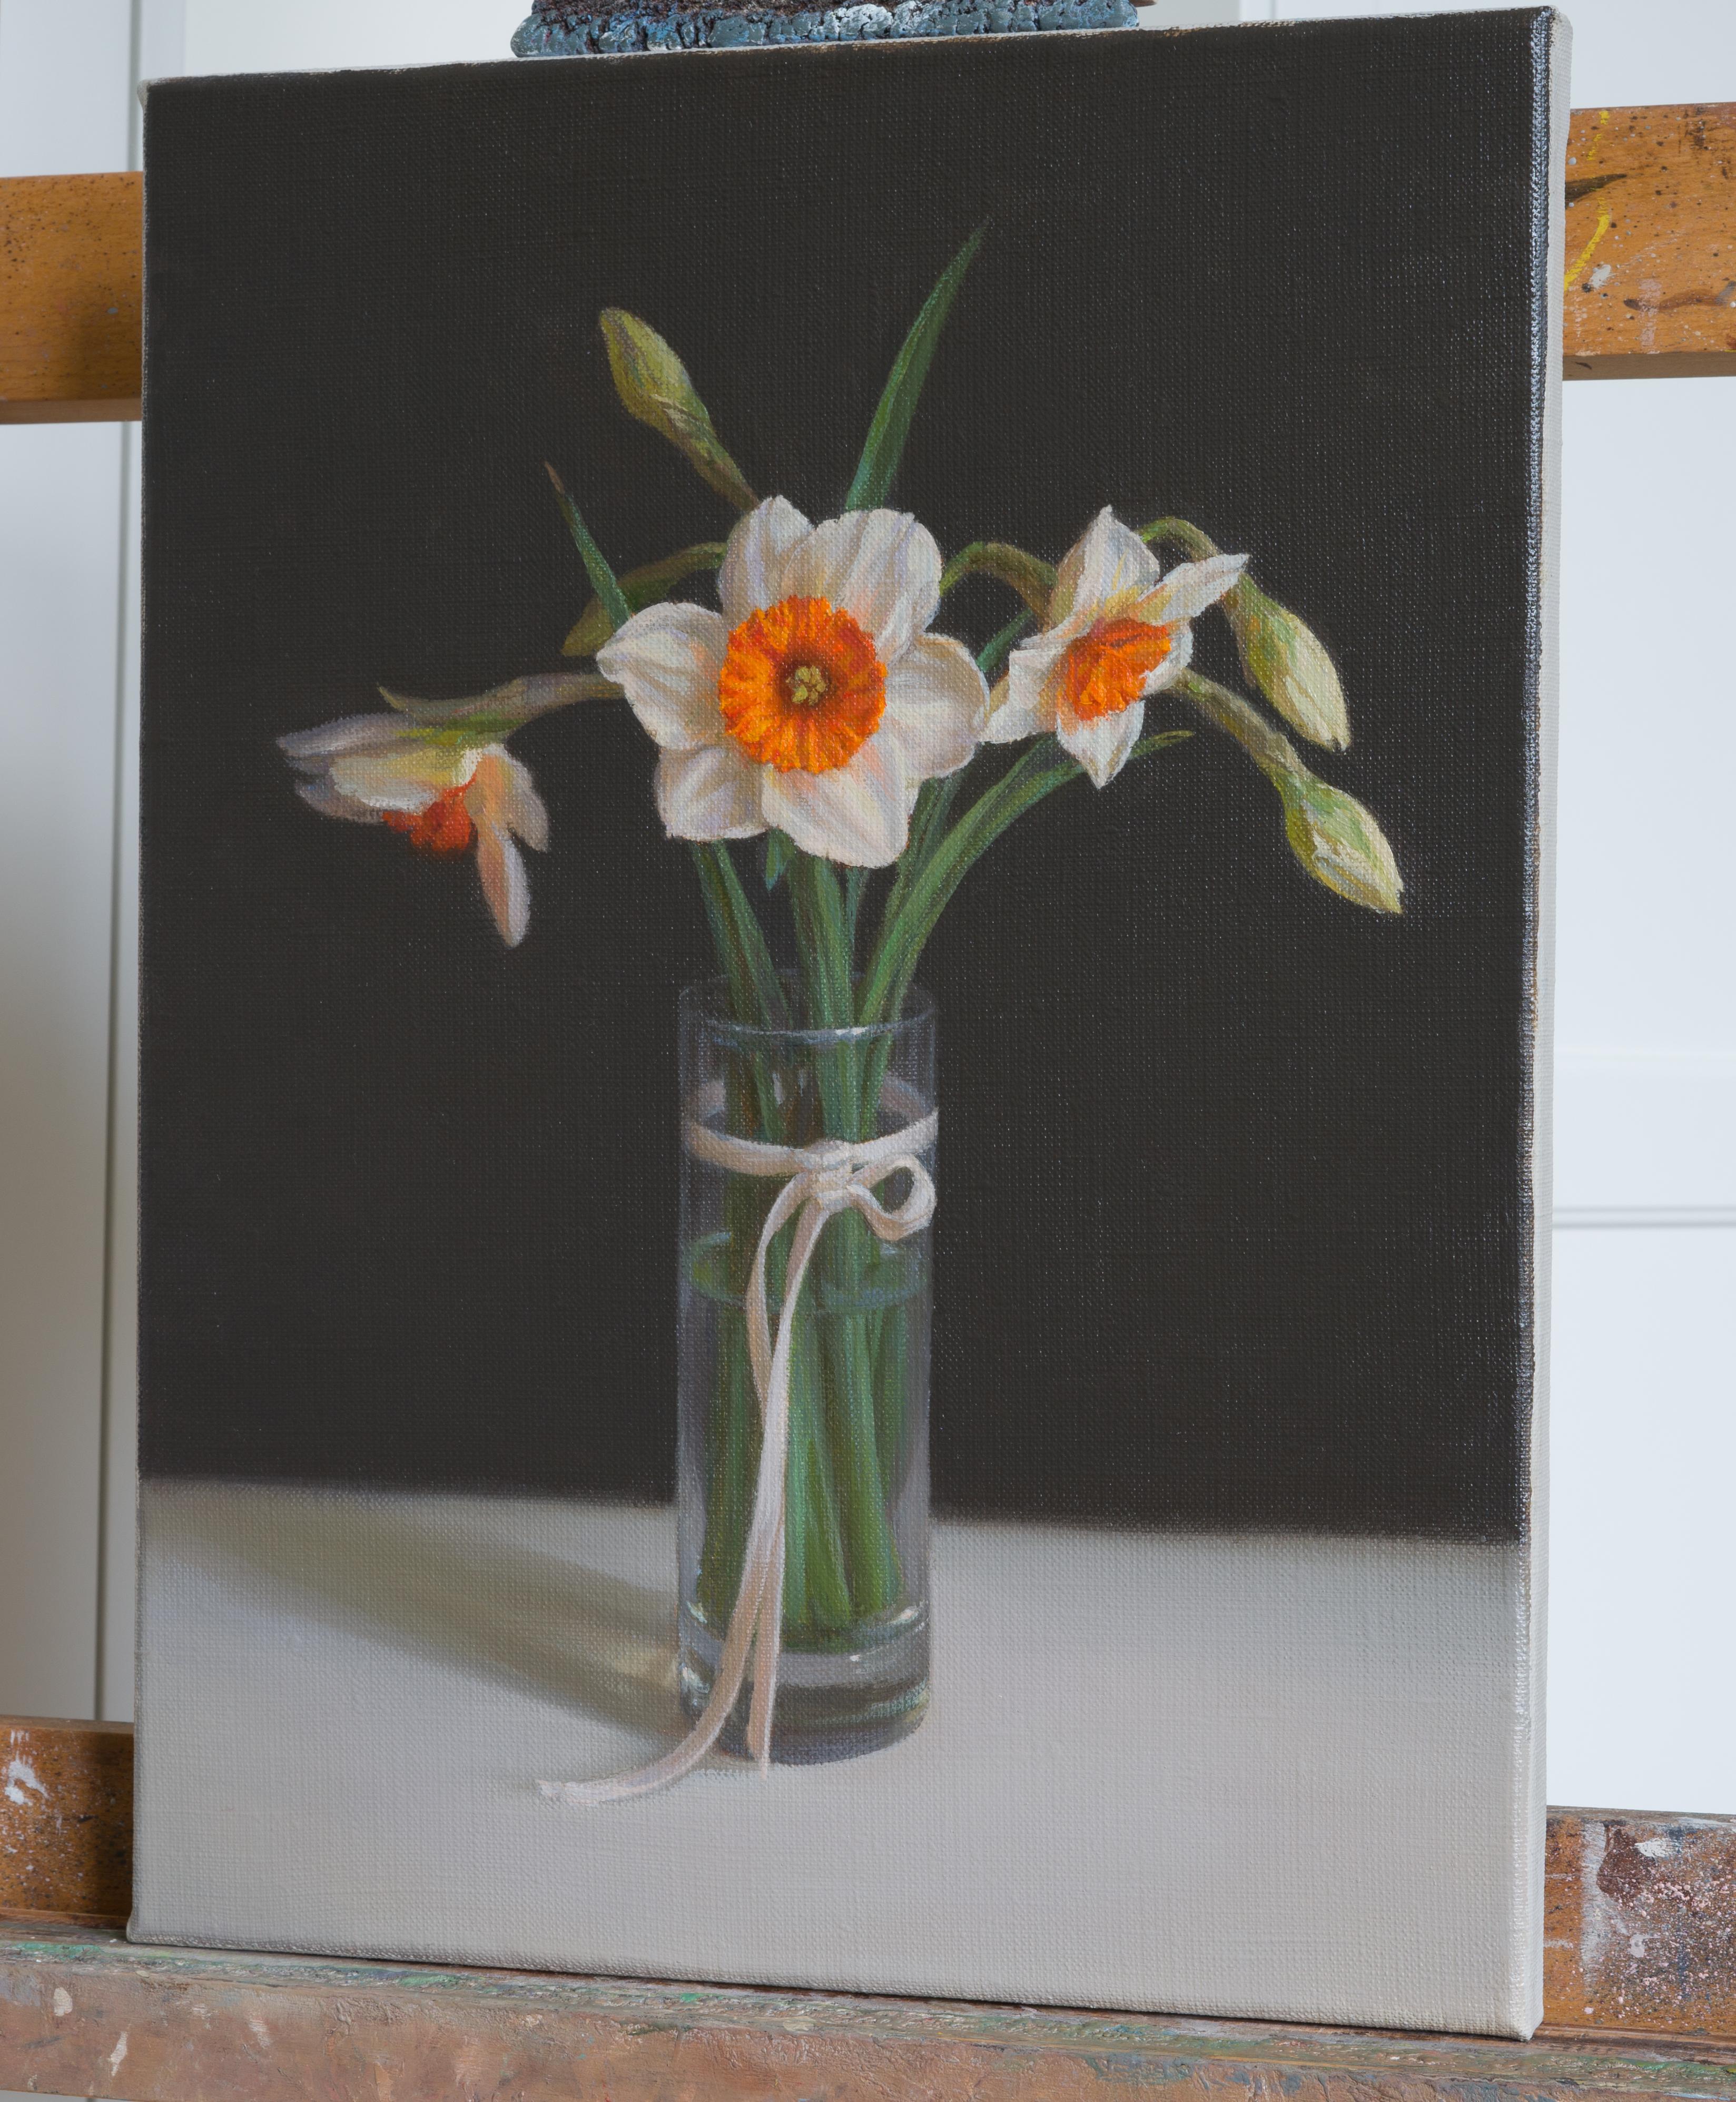 Gift, Realist Modern Still life oil painting with daffodils by Irina Trushkova For Sale 3